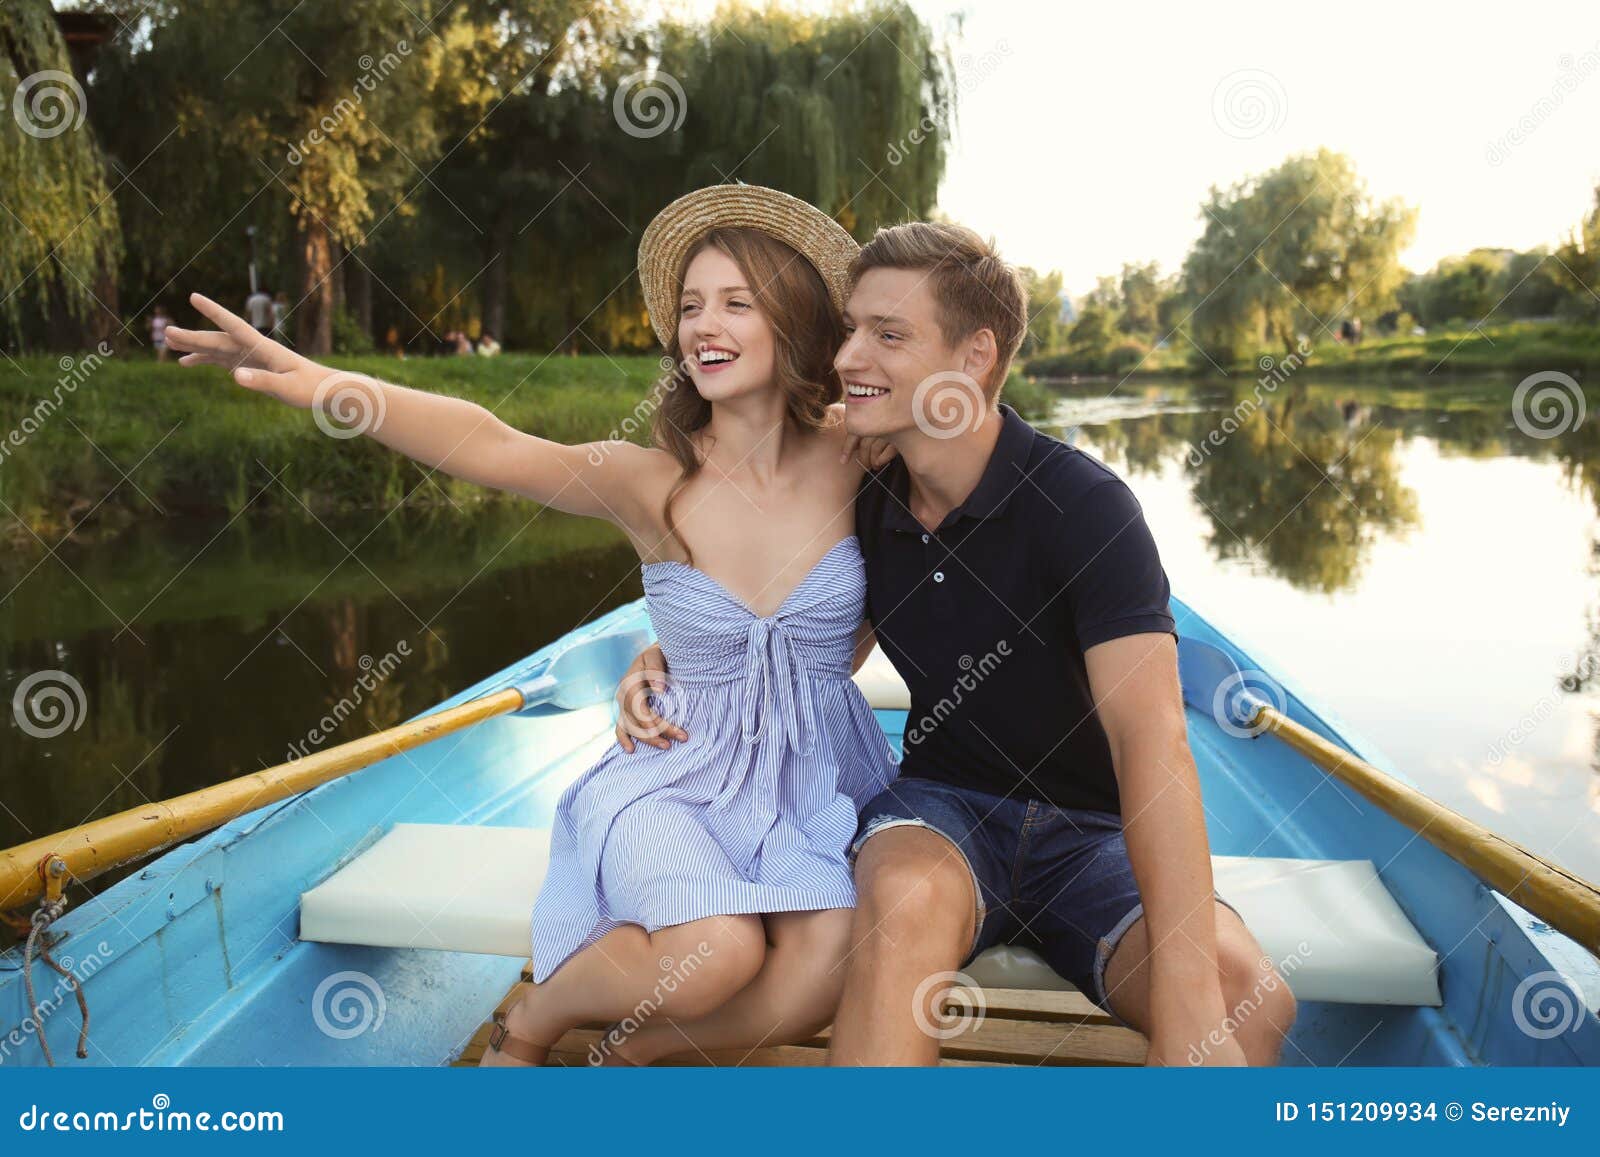 https://thumbs.dreamstime.com/z/cute-young-couple-having-romantic-date-boat-cute-young-couple-having-romantic-date-boat-151209934.jpg